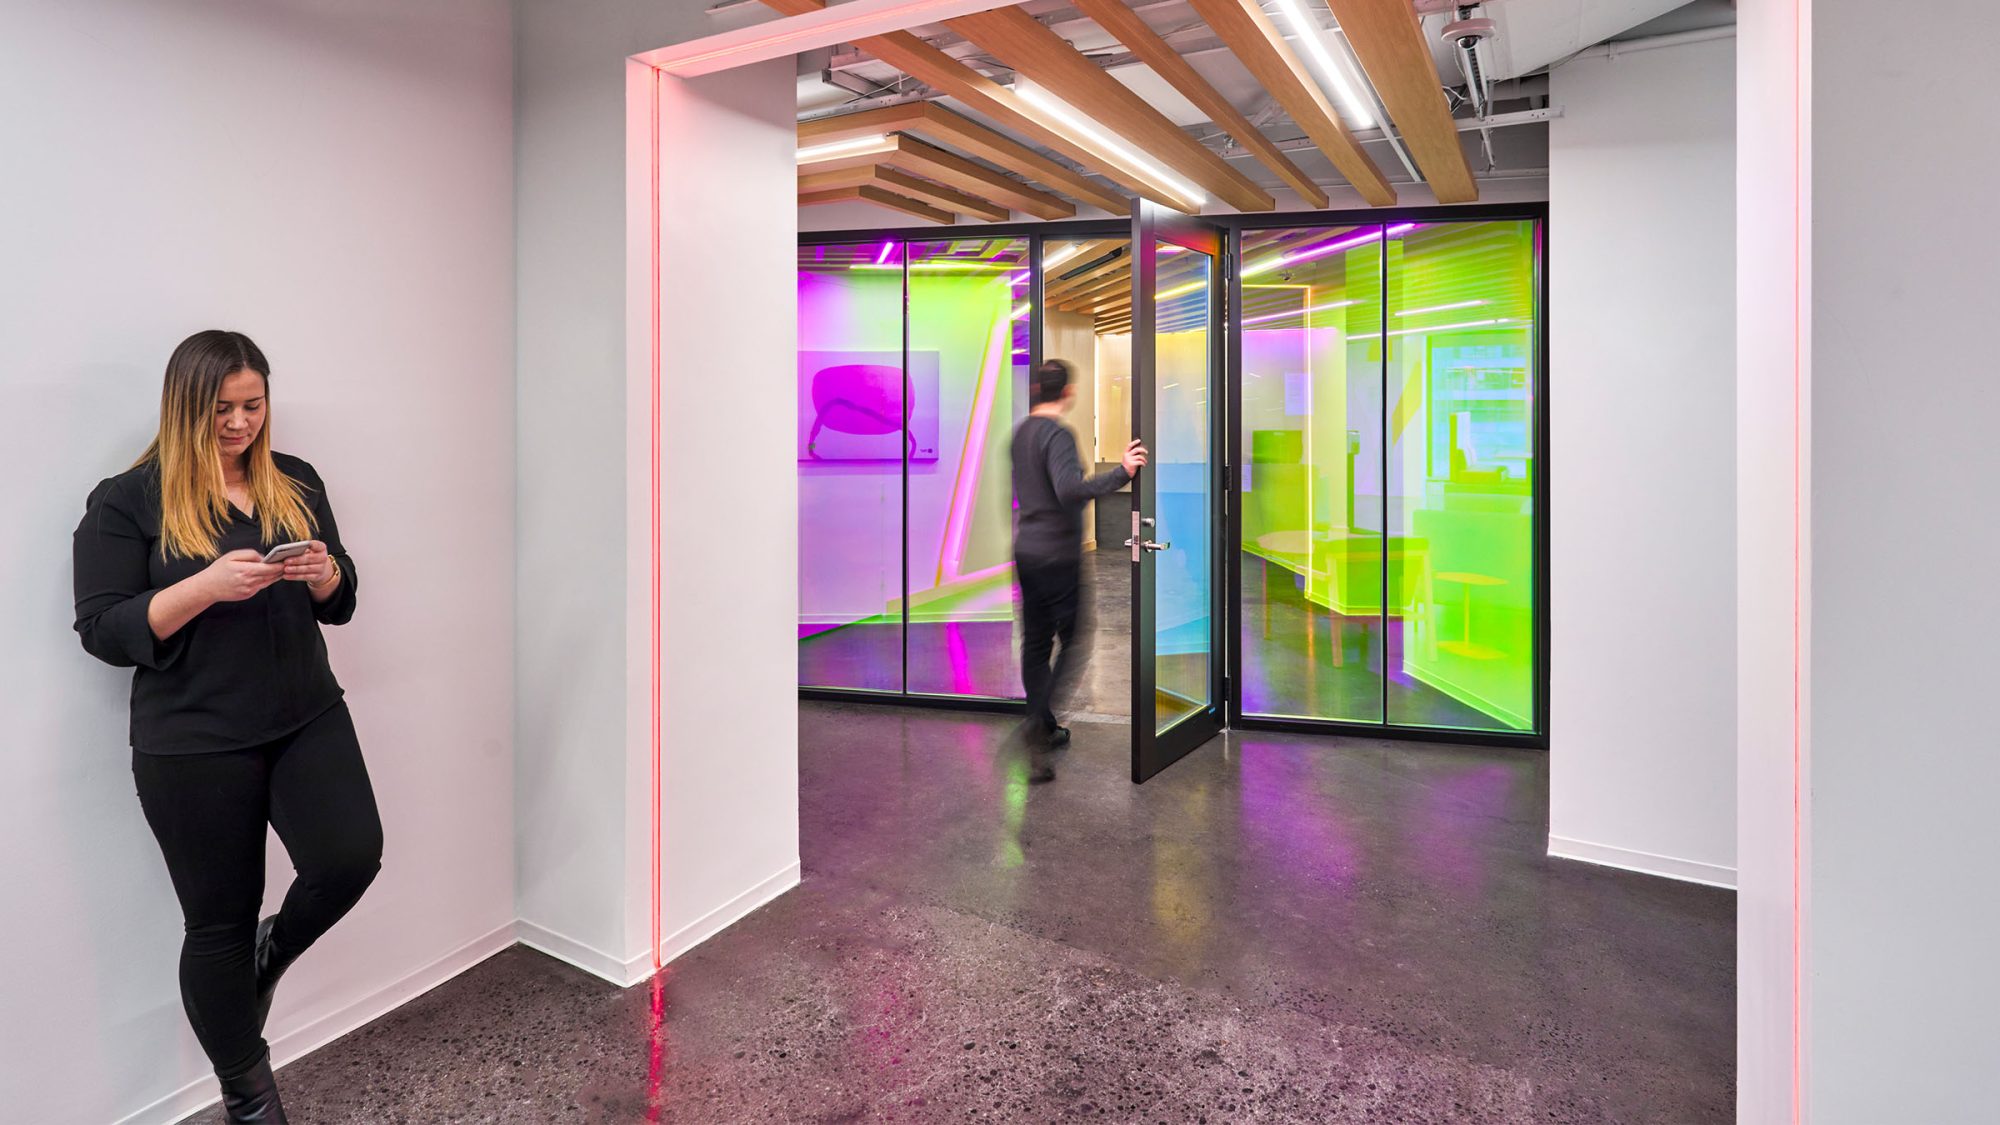 Software company office design in New York featuring a colourful brand and employee experience.